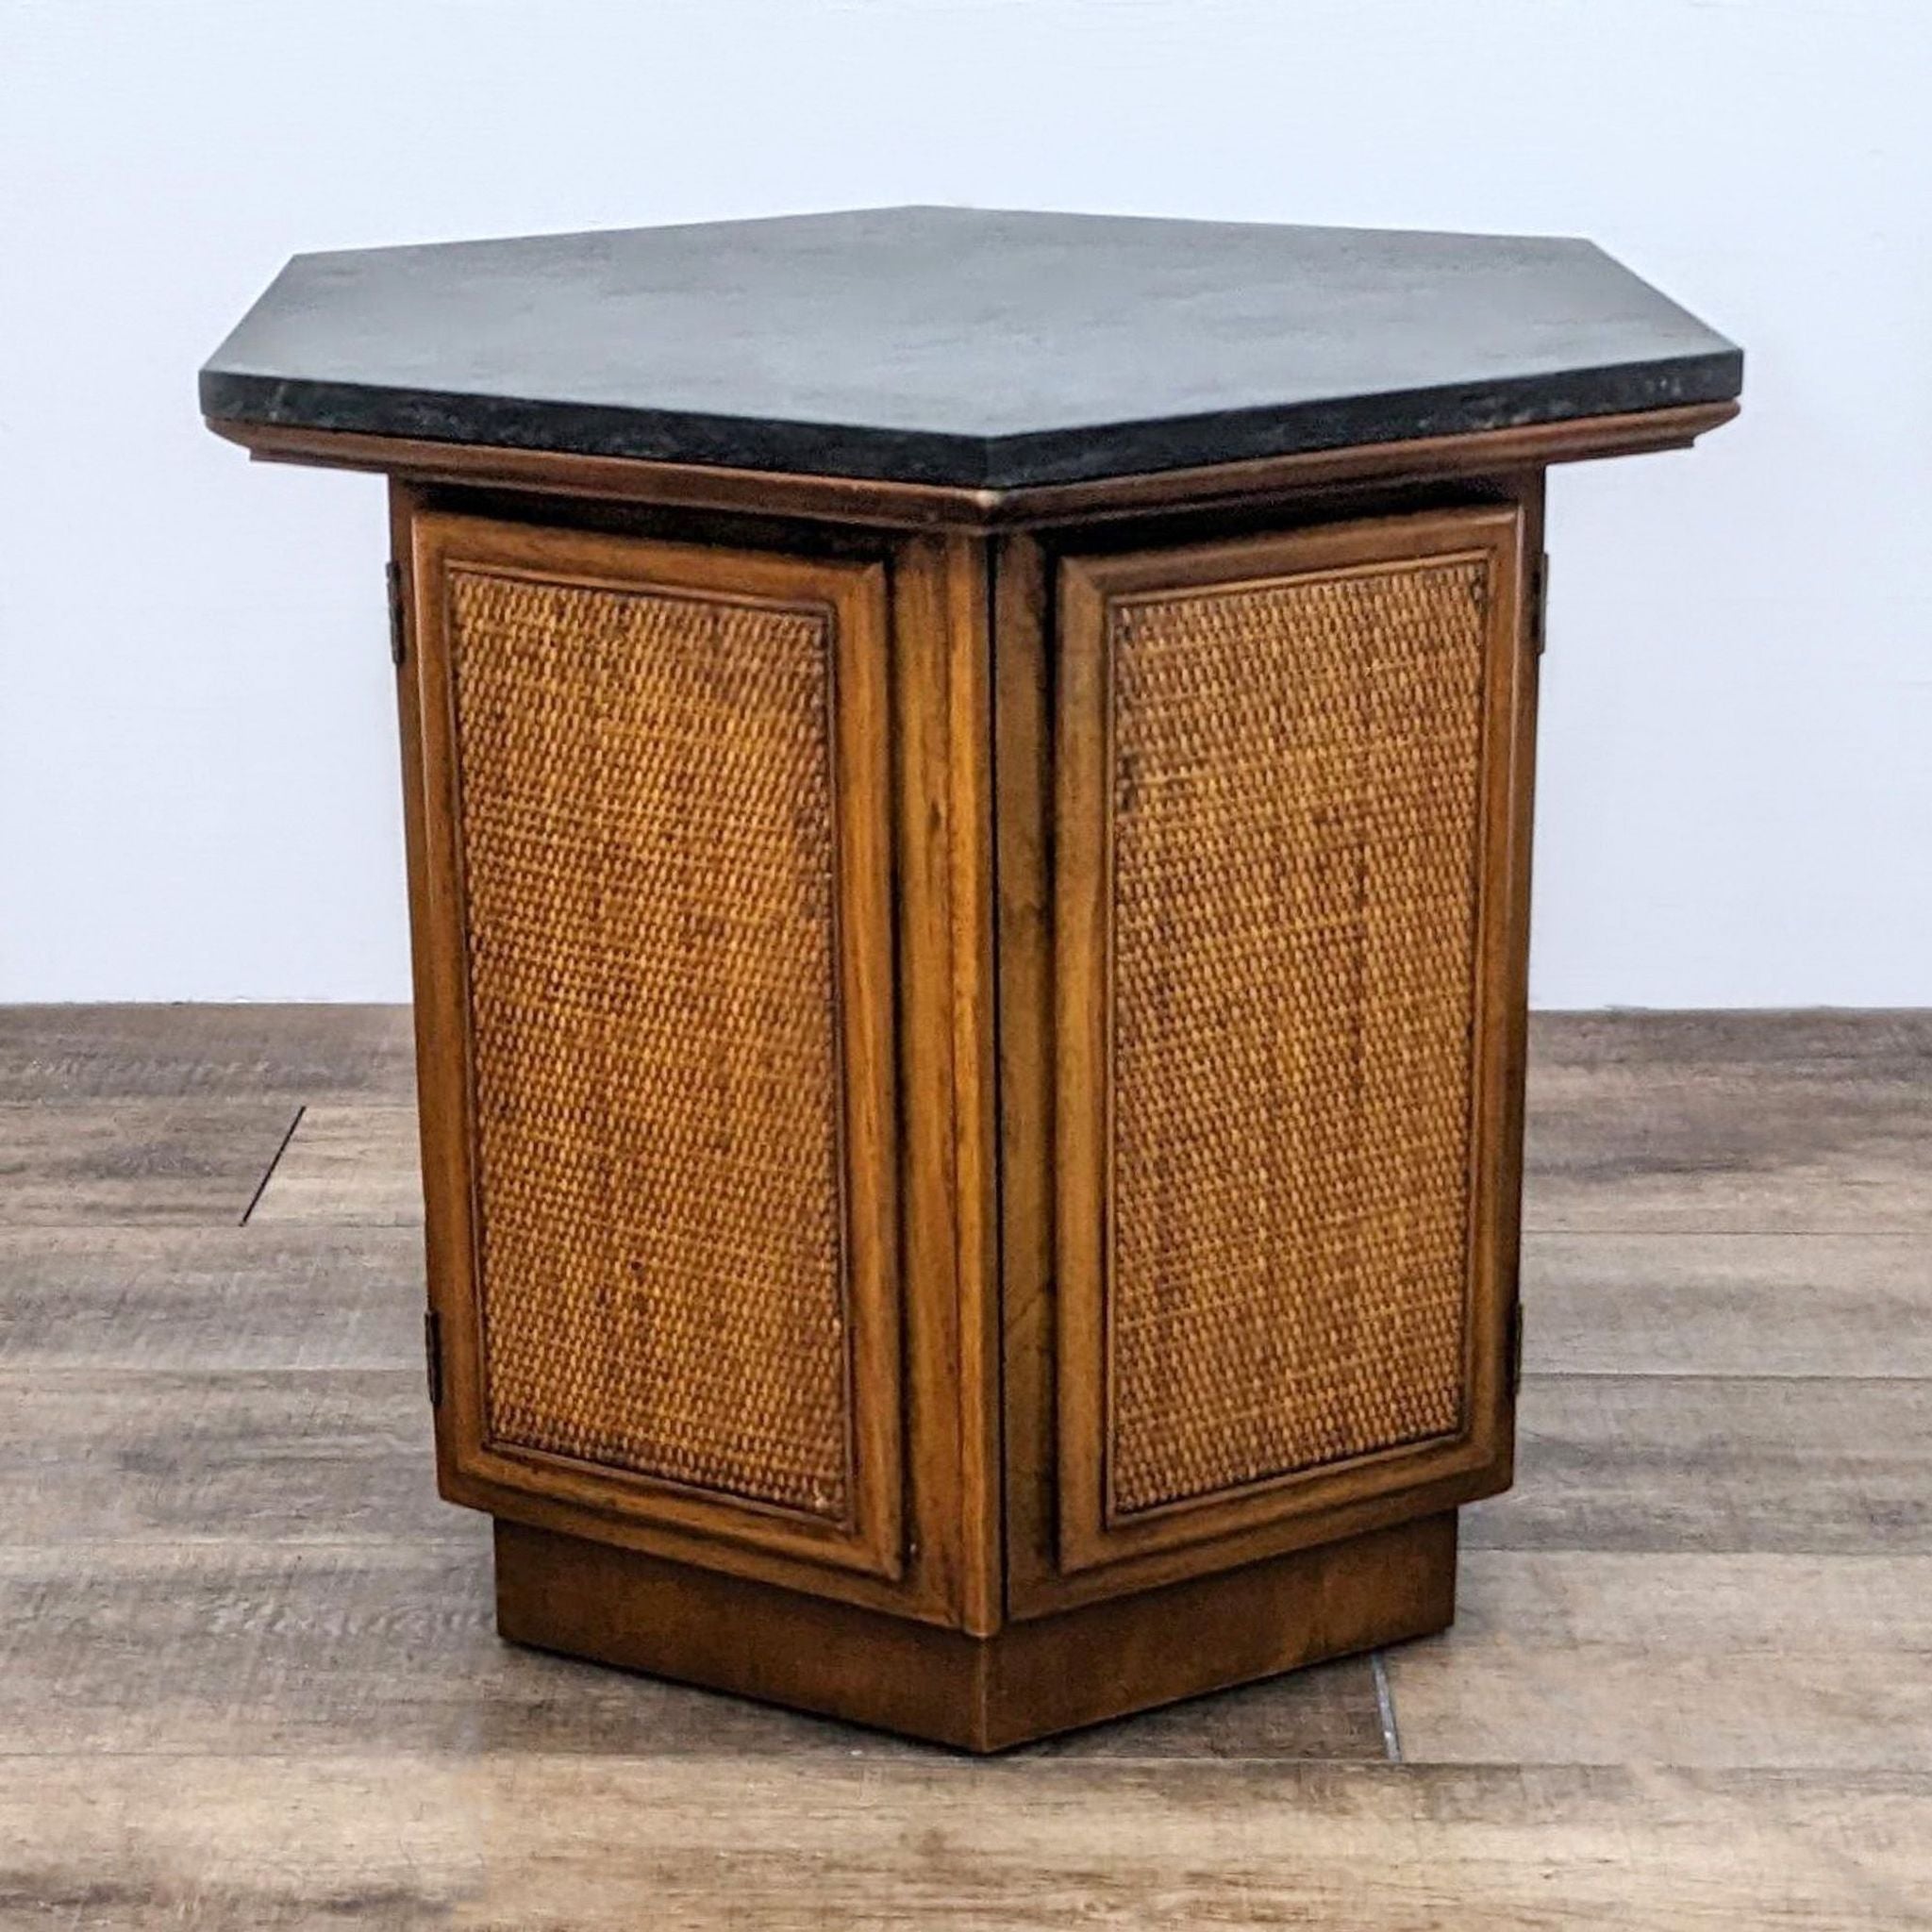 Reperch end table with closed rattan-faced cabinet doors and hexagonal dark top.